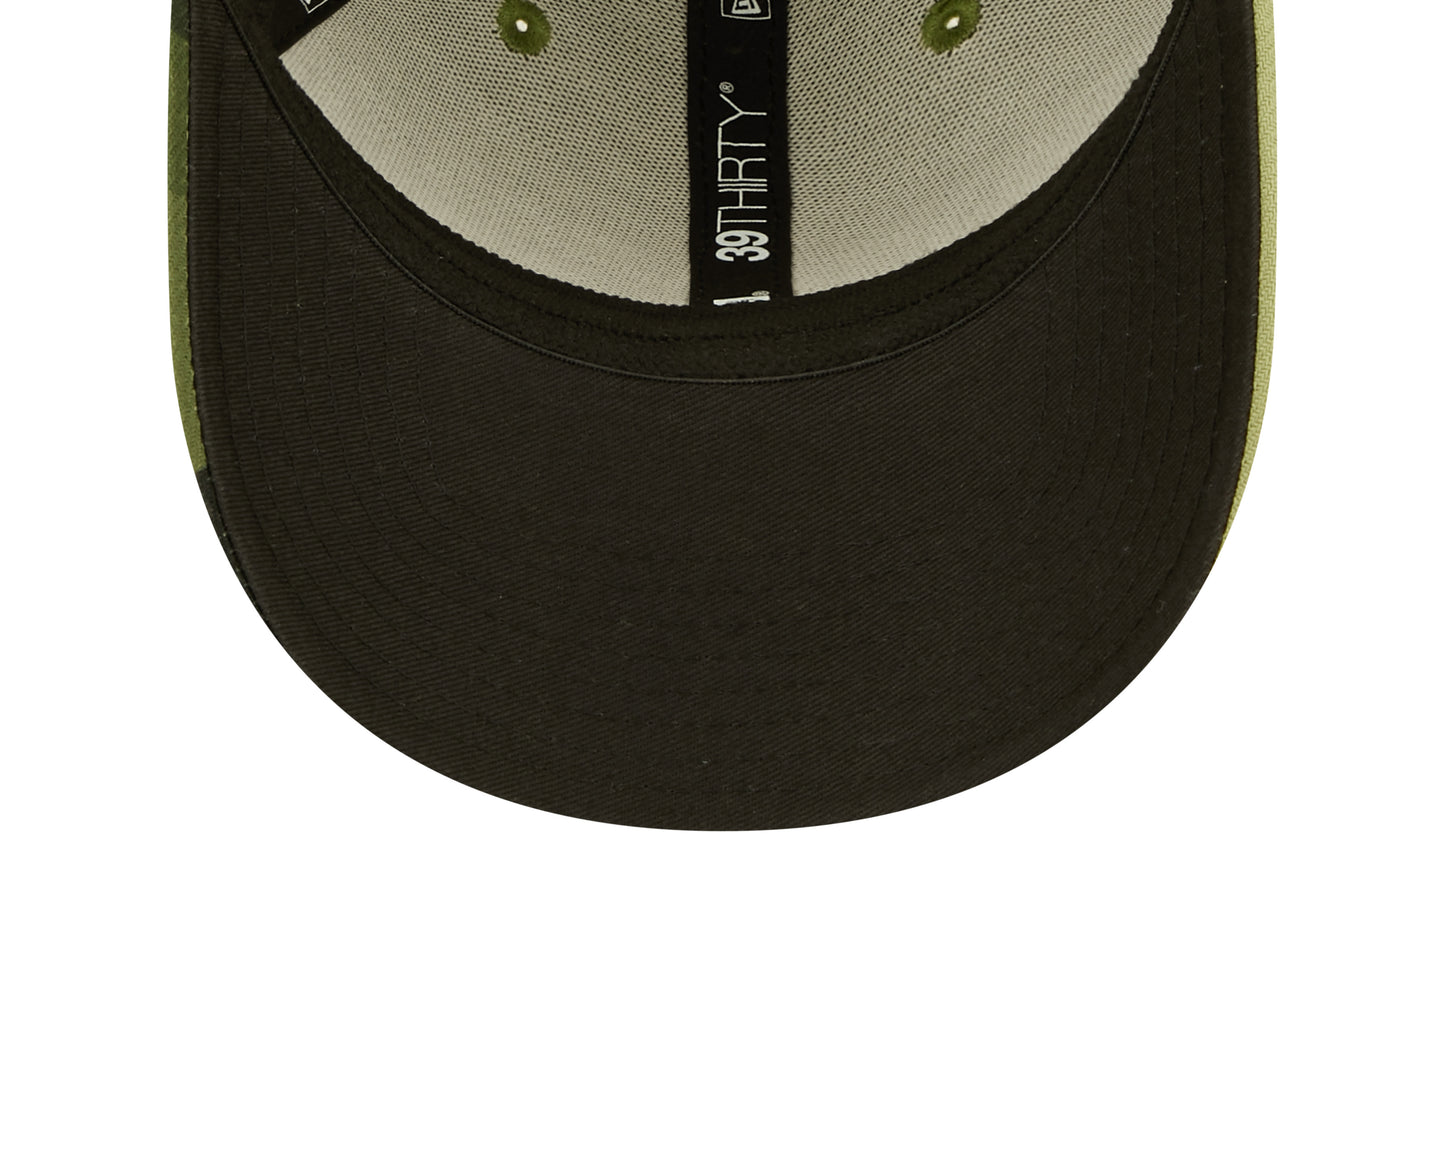 New York Yankees New Era Camo Armed Forces Day On-Field 39Thirty Flex Fit Hat